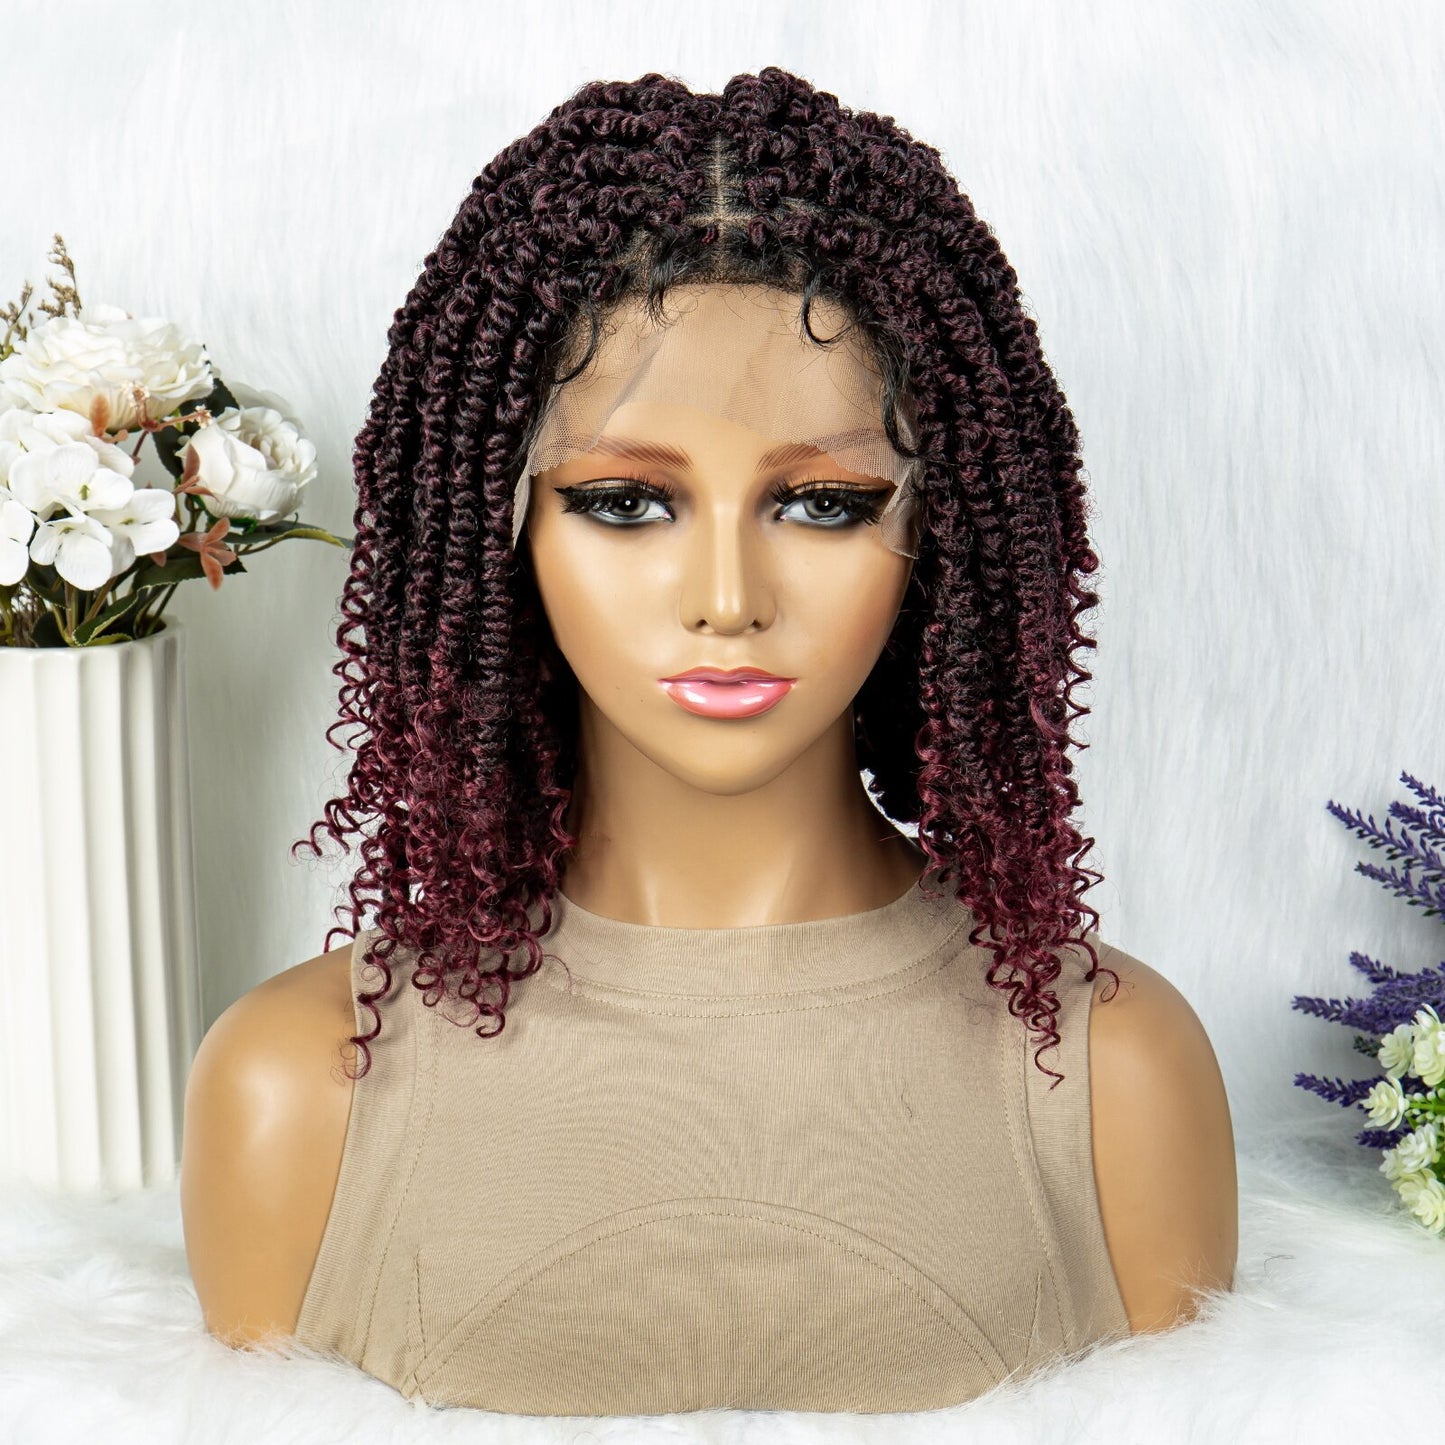 Synthetic Lace Front Wig Butterfly Locs Braided Wigs Dreadlock Wig 14 inches Short Knotless Wigs for Black Women Synthetic Wig